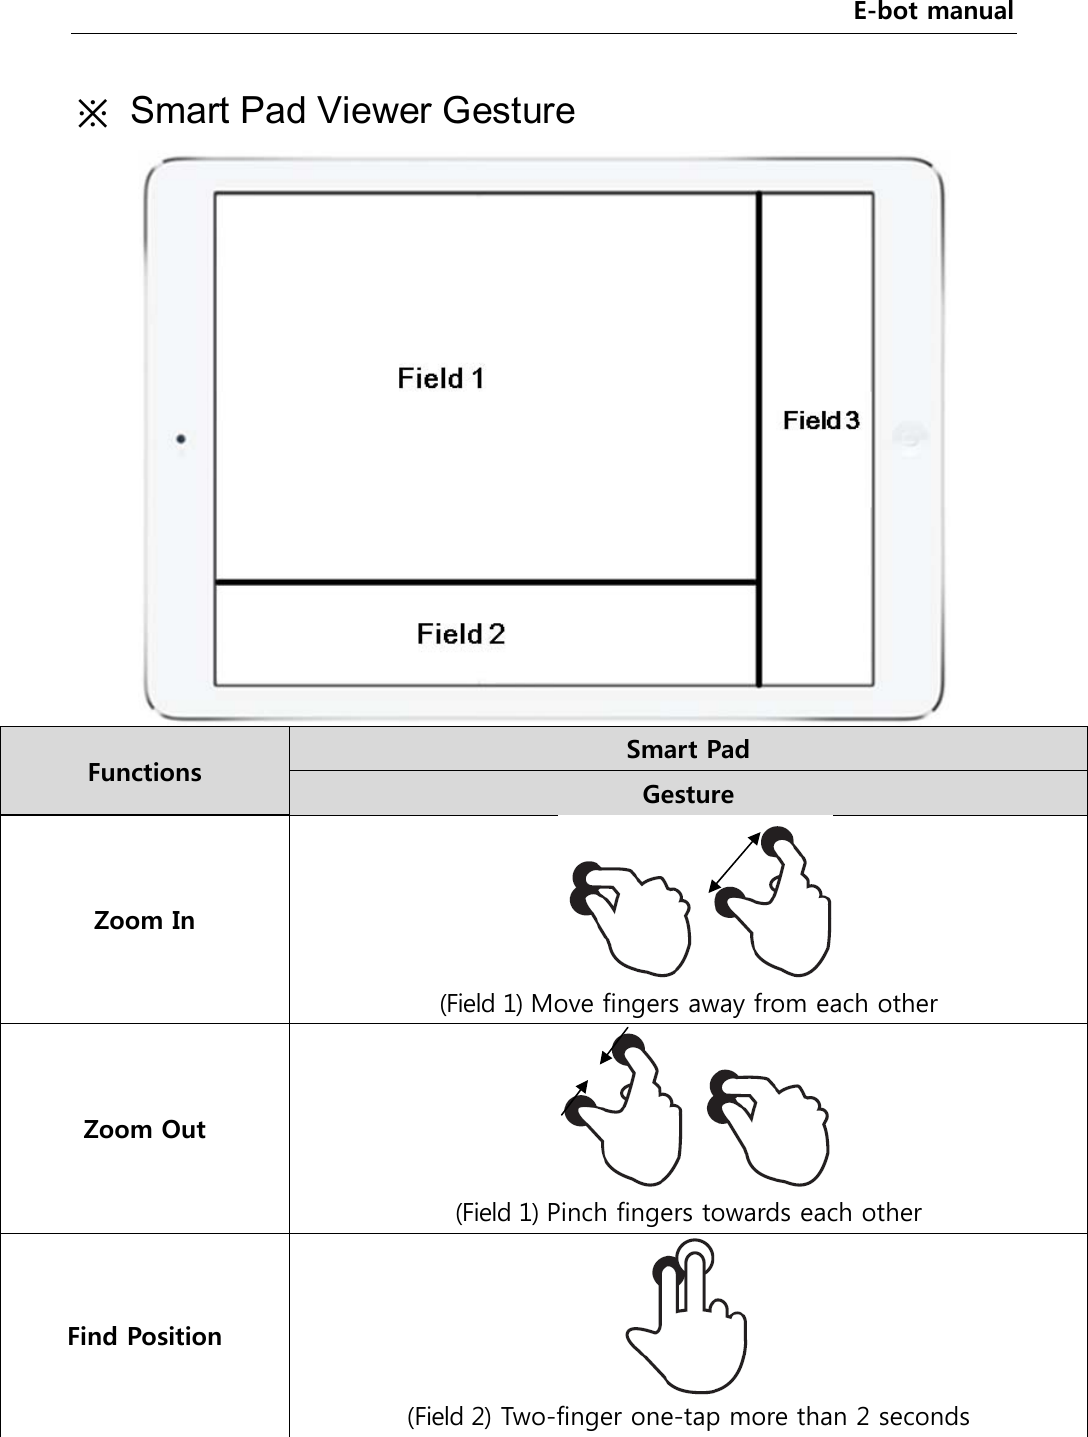 E-bot manual ※  Smart Pad Viewer Gesture  Functions  Smart Pad Gesture Zoom In   (Field 1) Move fingers away from each other Zoom Out  (Field 1) Pinch fingers towards each other Find Position  (Field 2) Two-finger one-tap more than 2 seconds 